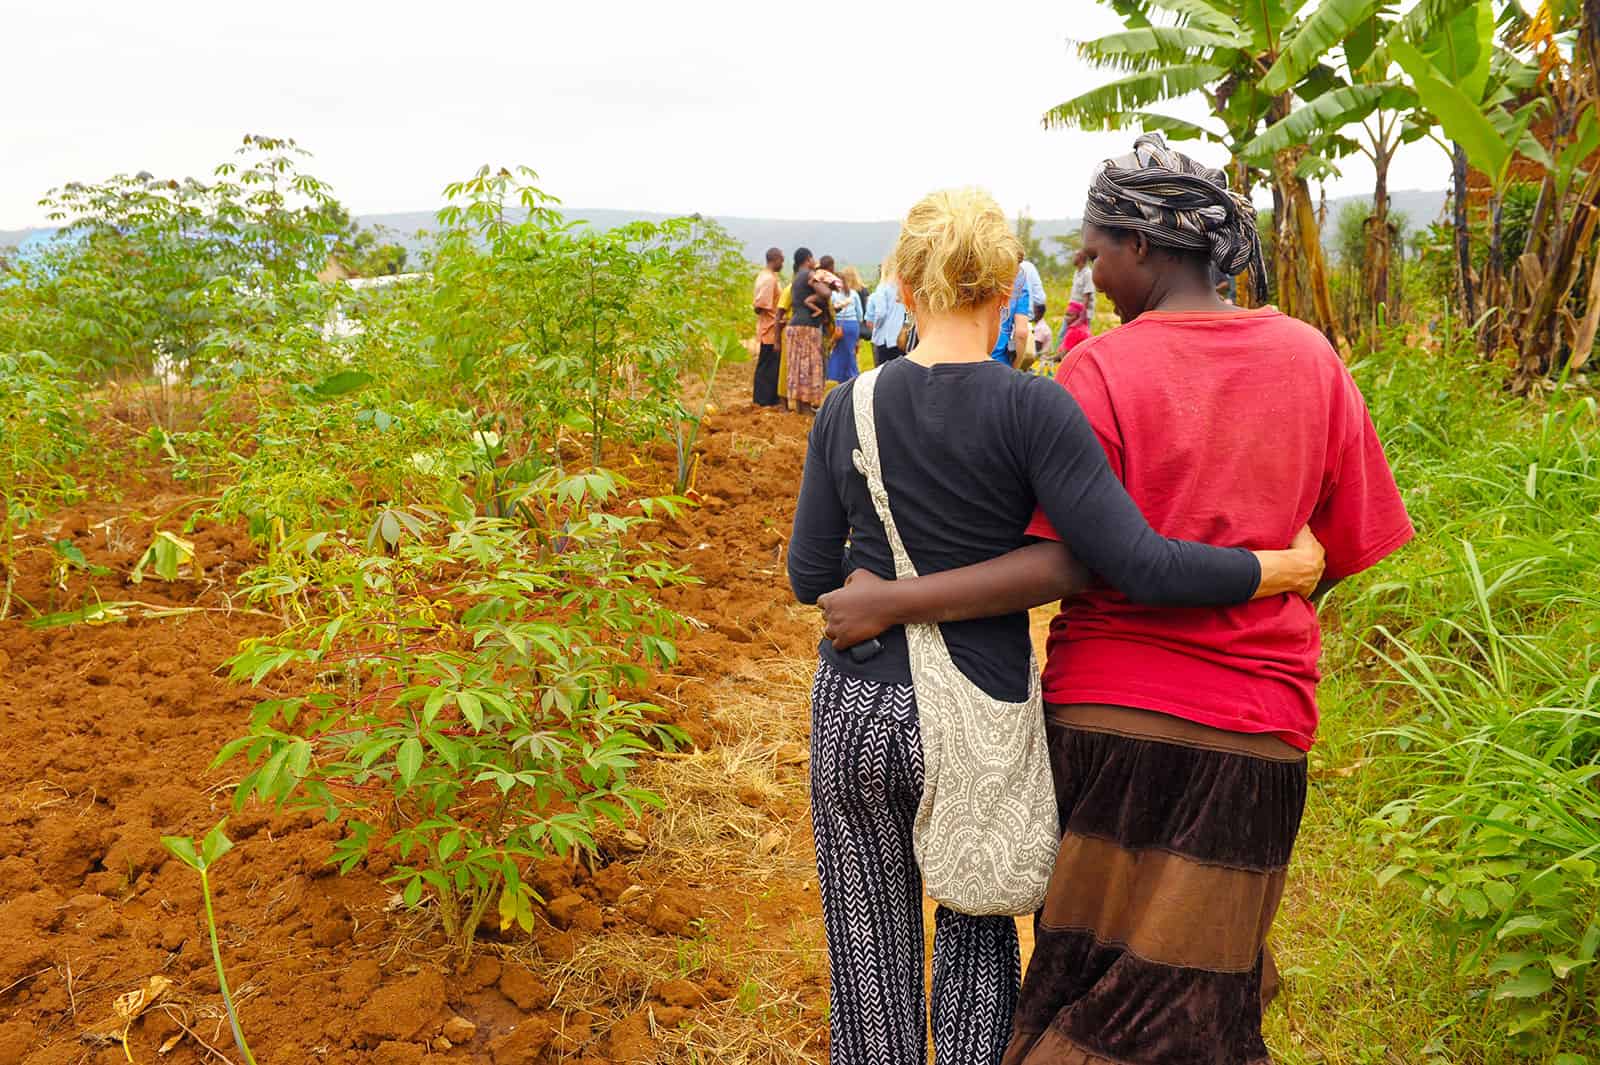 Two women walk down a dirt path together with their arms around one another.